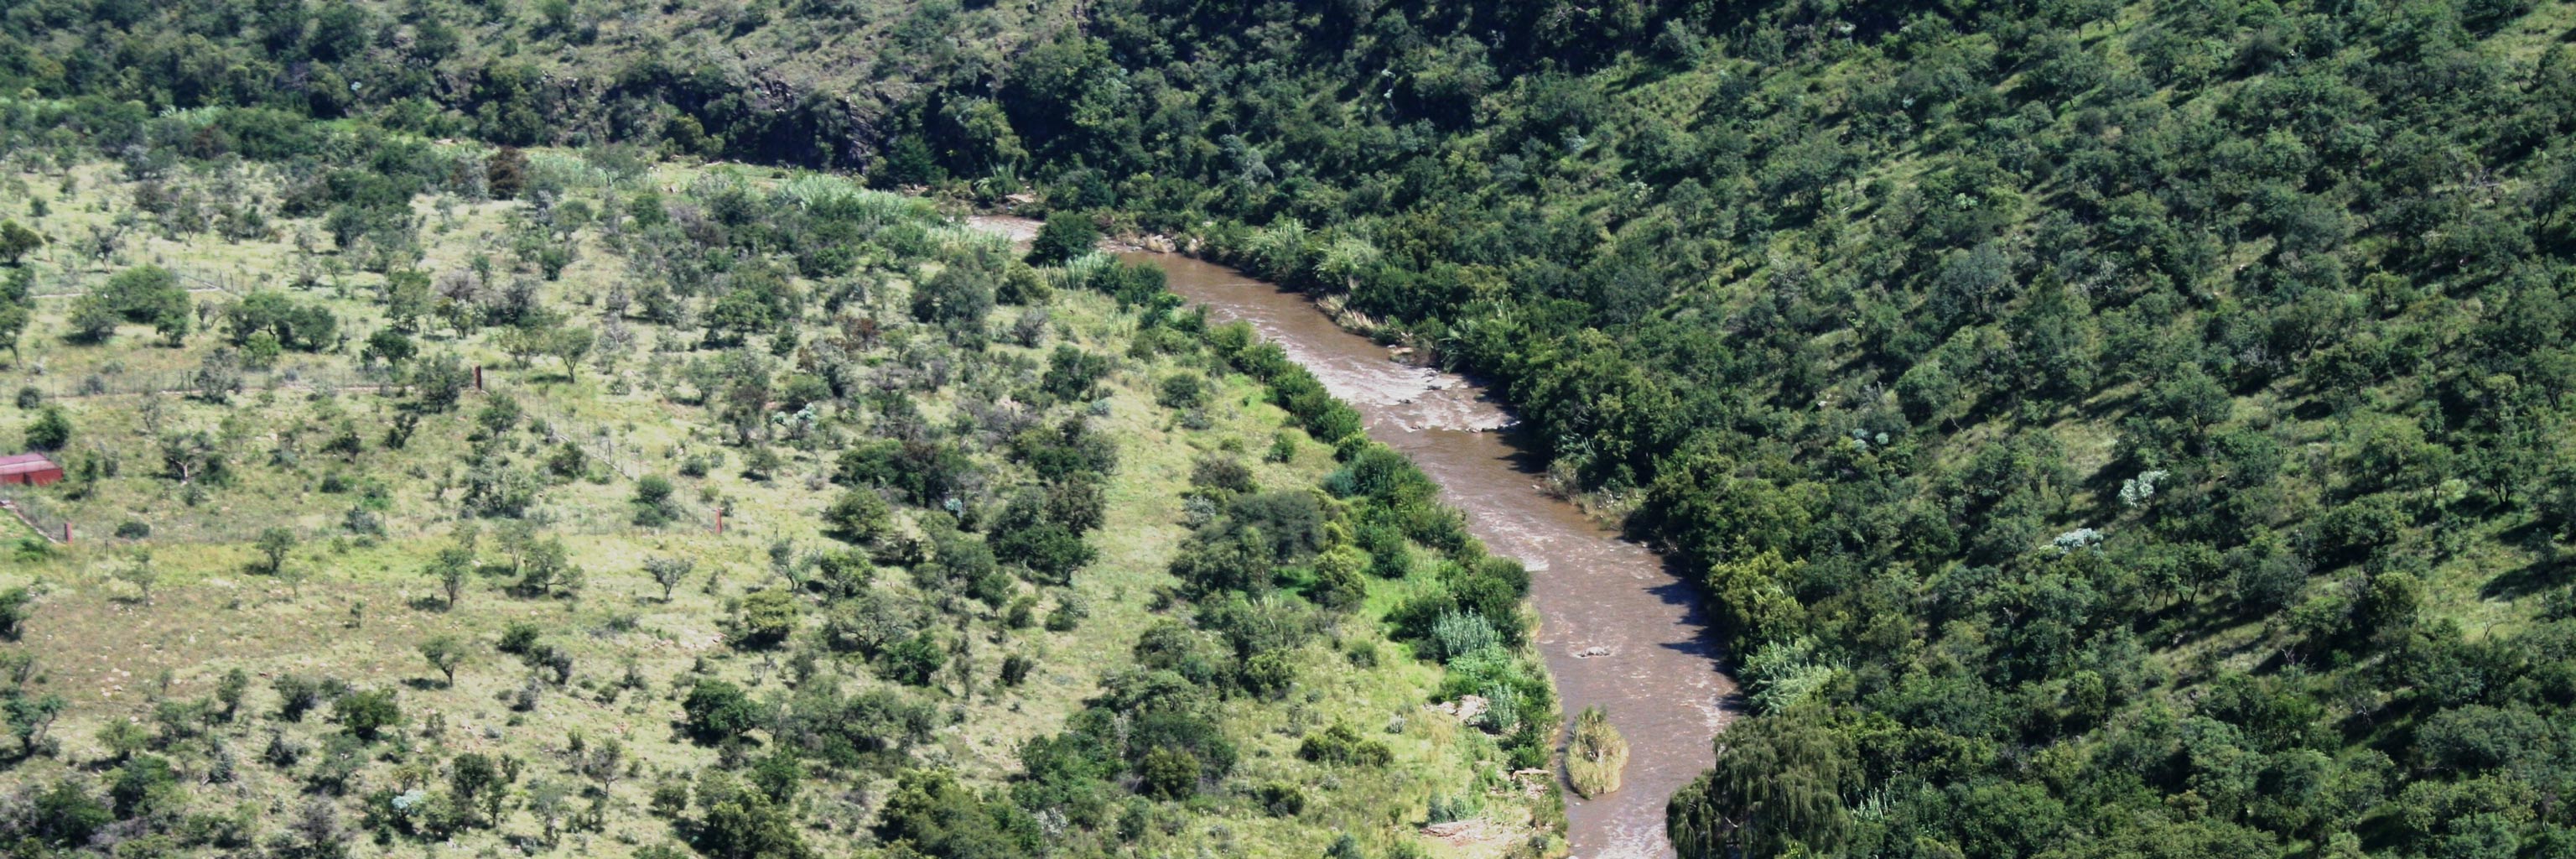 Aerial view of forested landscape